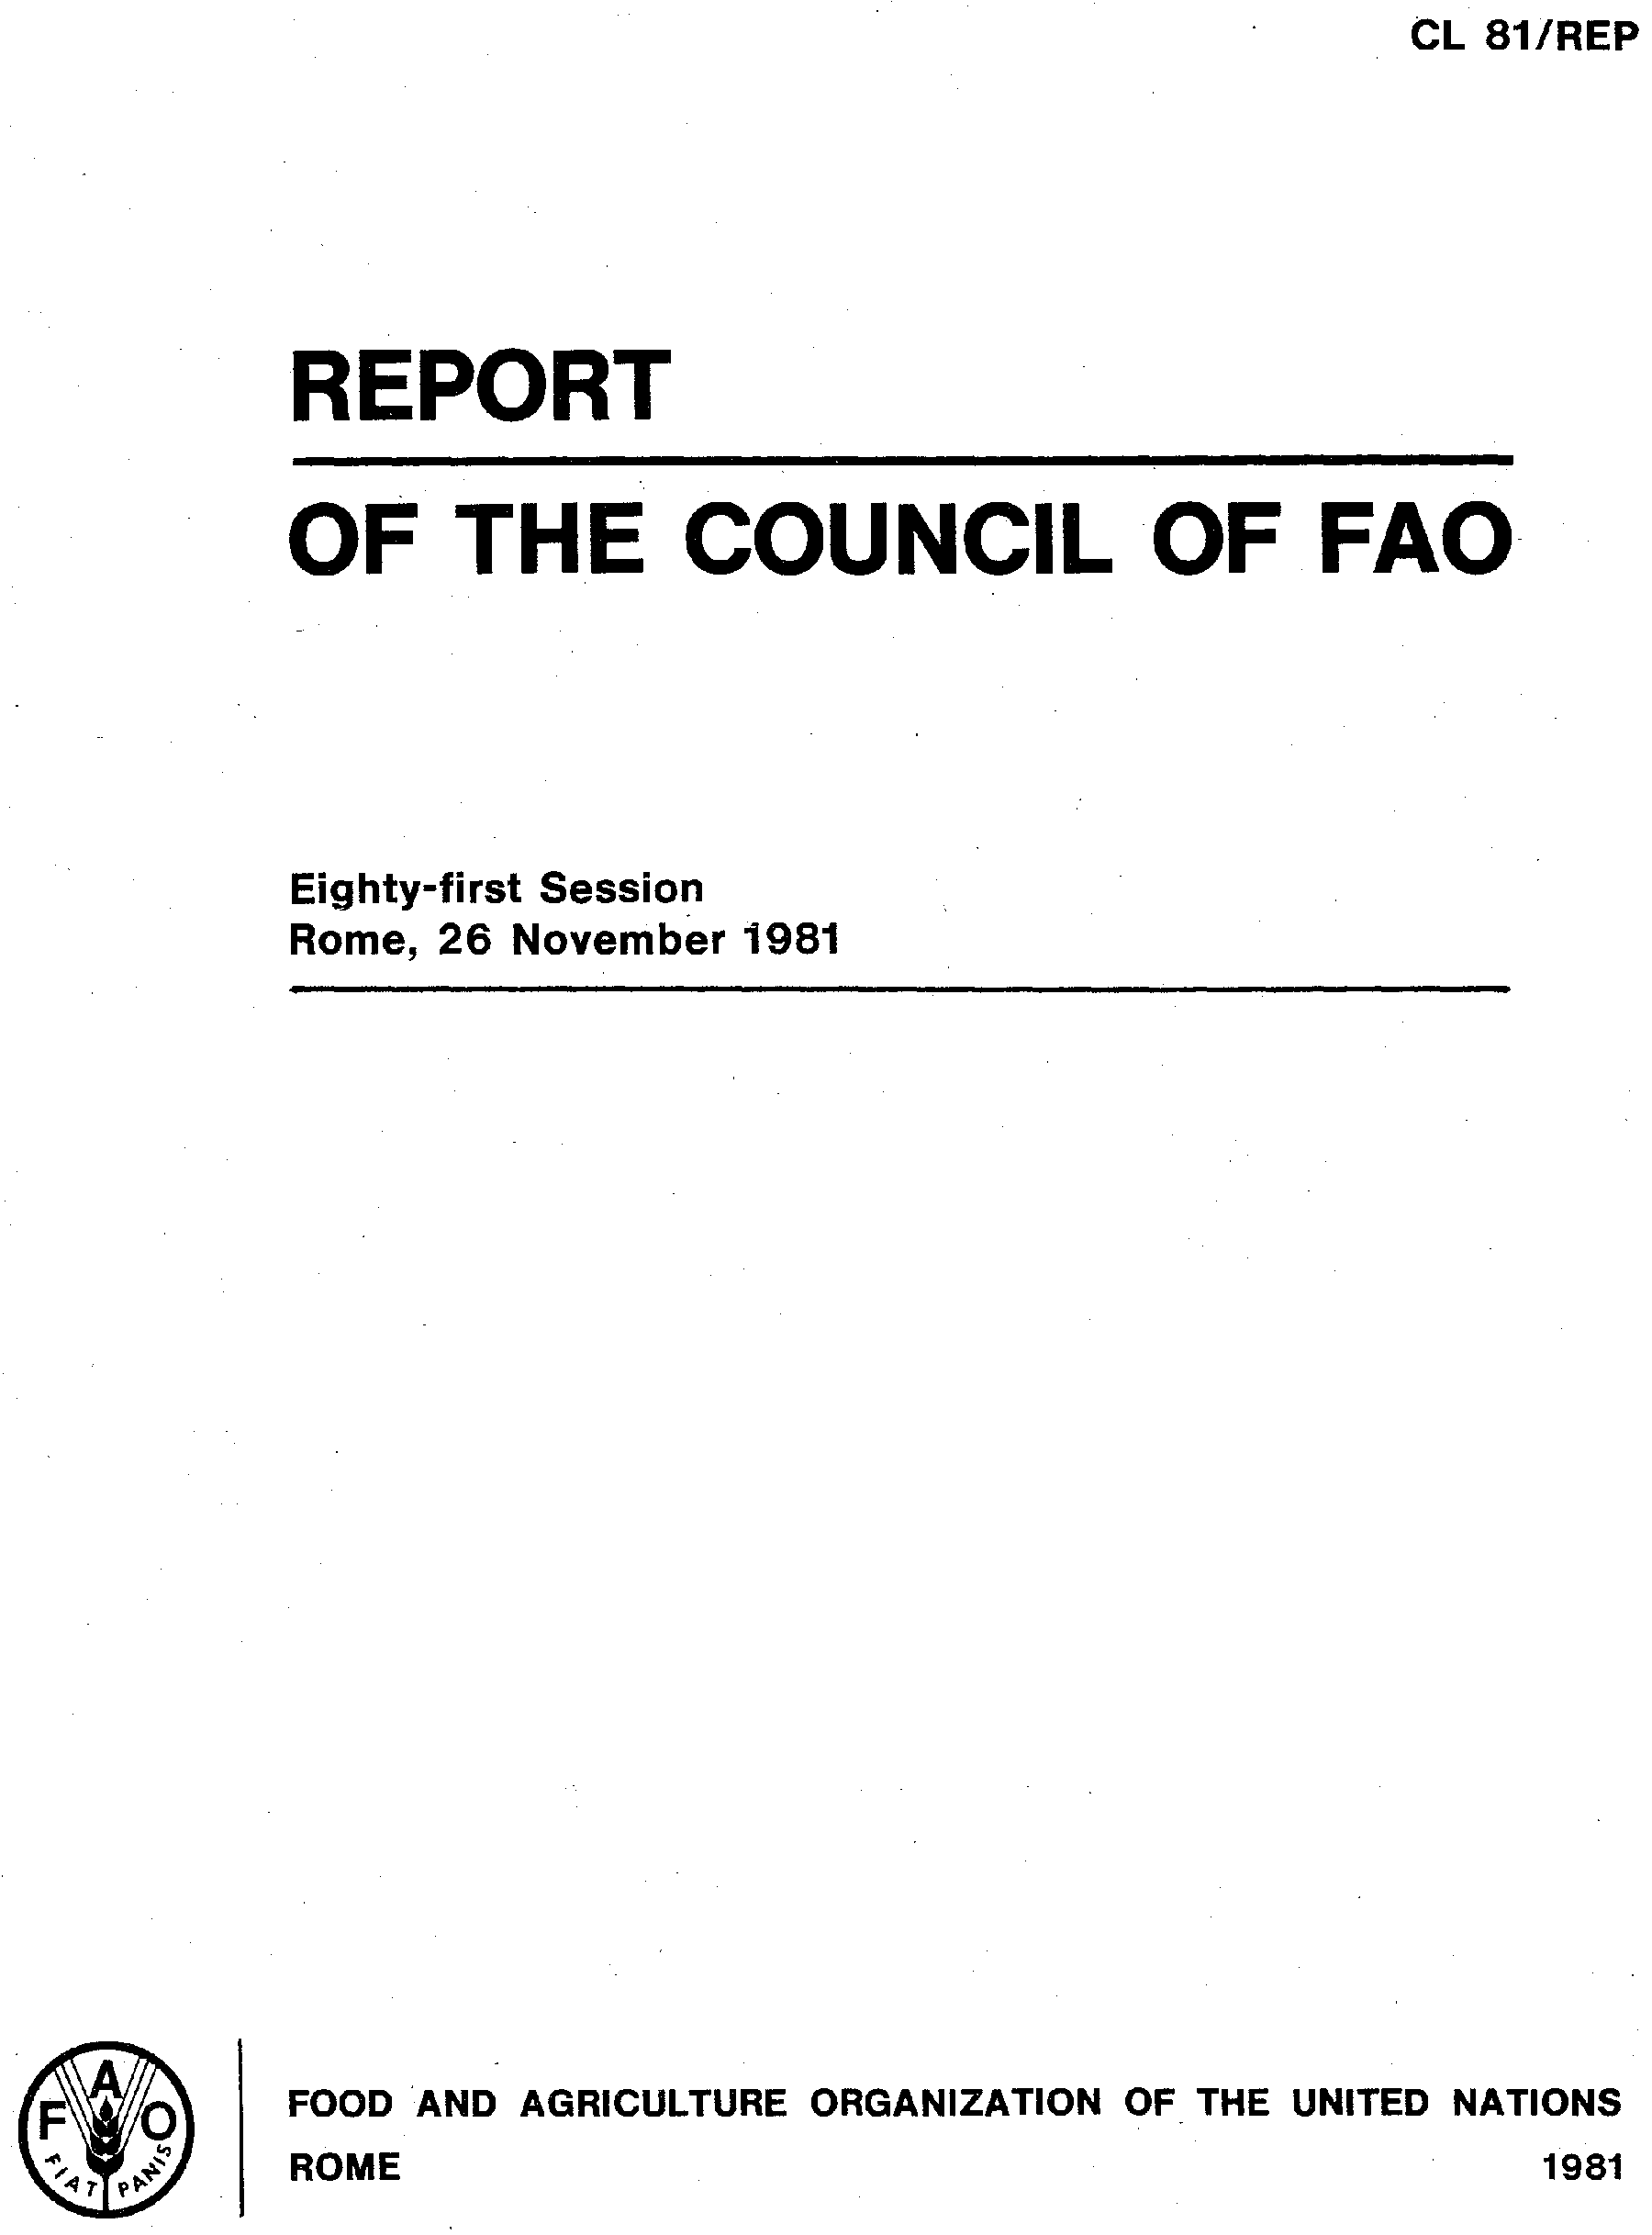 REPORT OF THE COUNCIL OF FAO